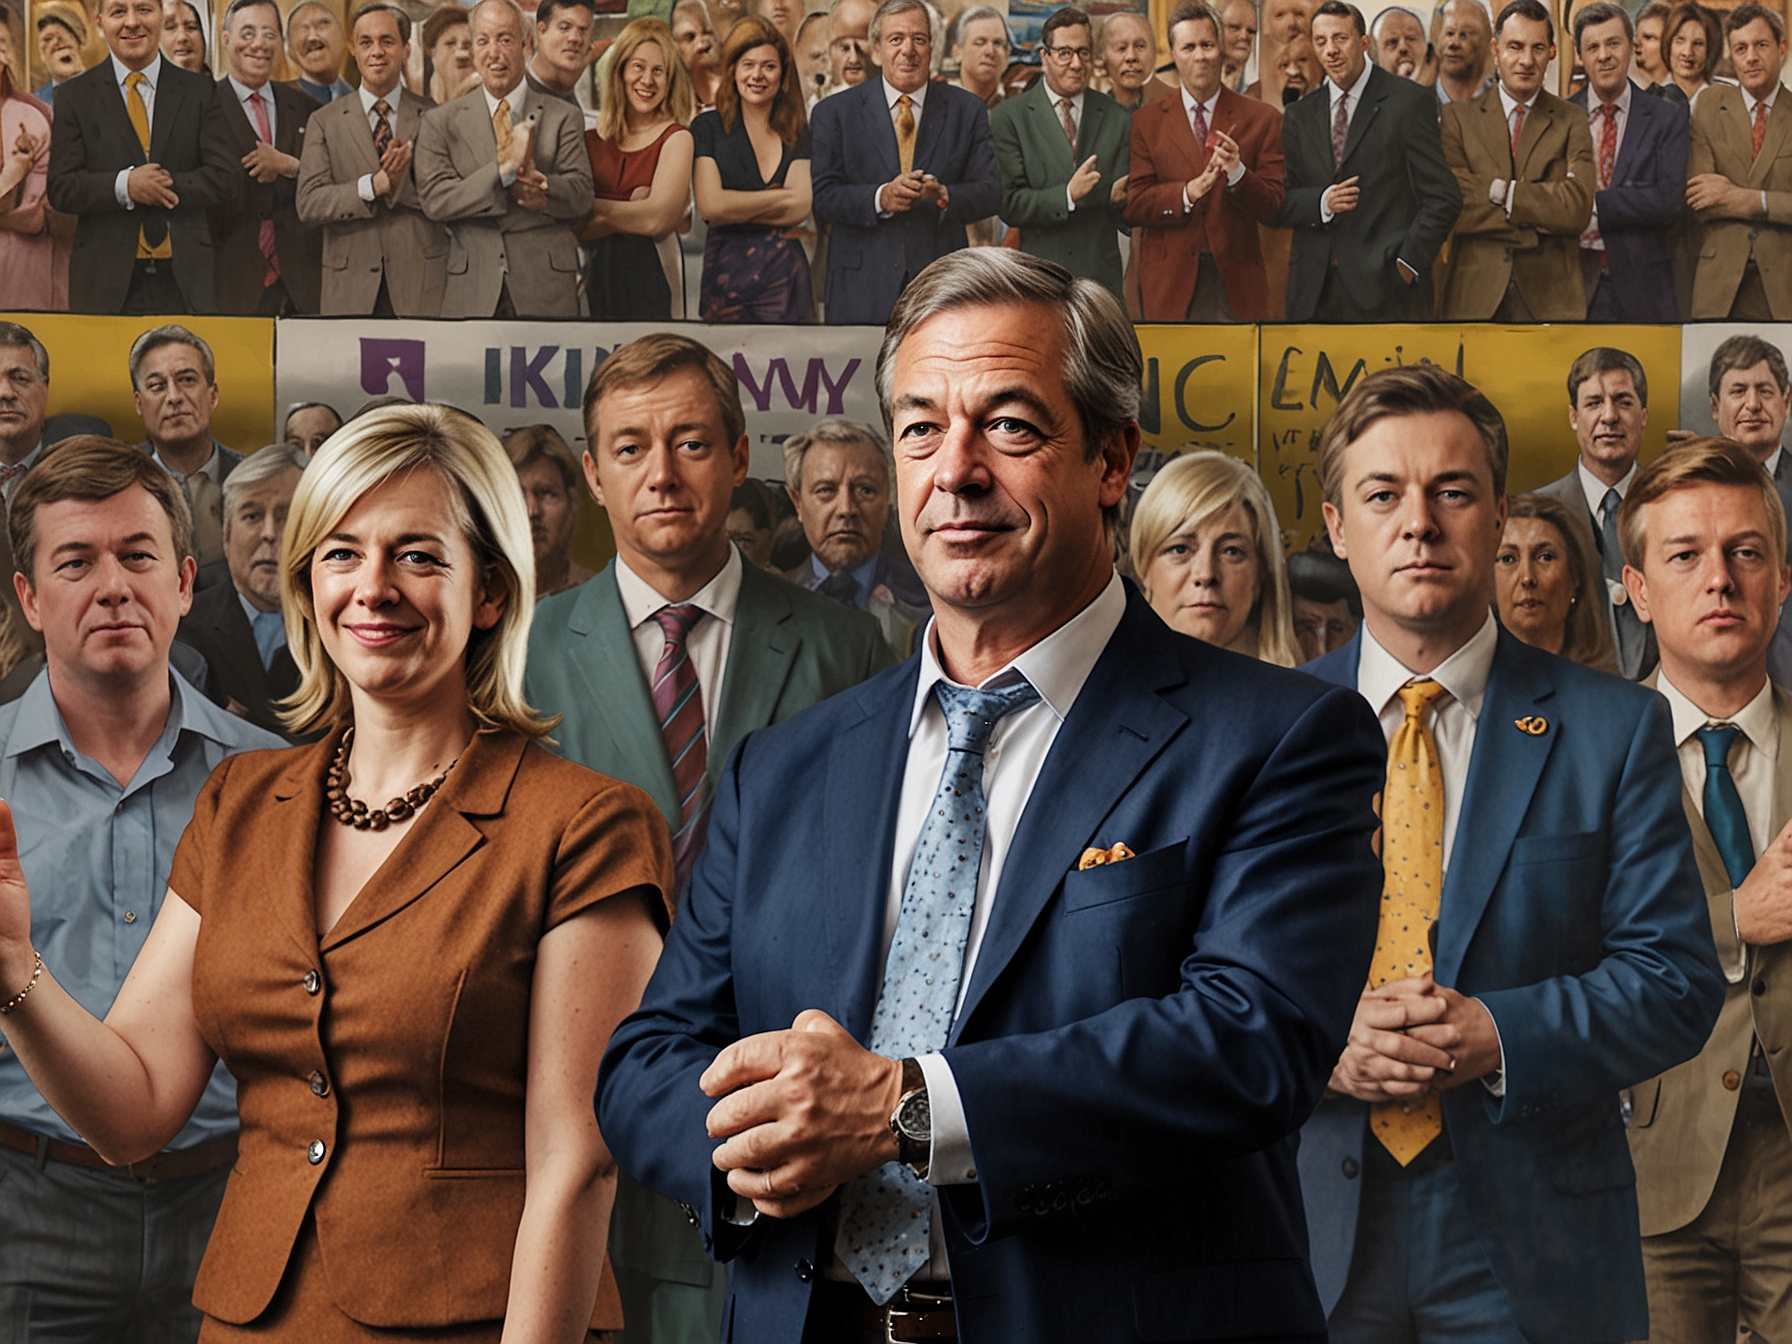 A collage of significant moments from UKIP and Brexit Party events, showcasing Farage's involvement and the debates surrounding his influence on mainstream and far-right politics in the UK.